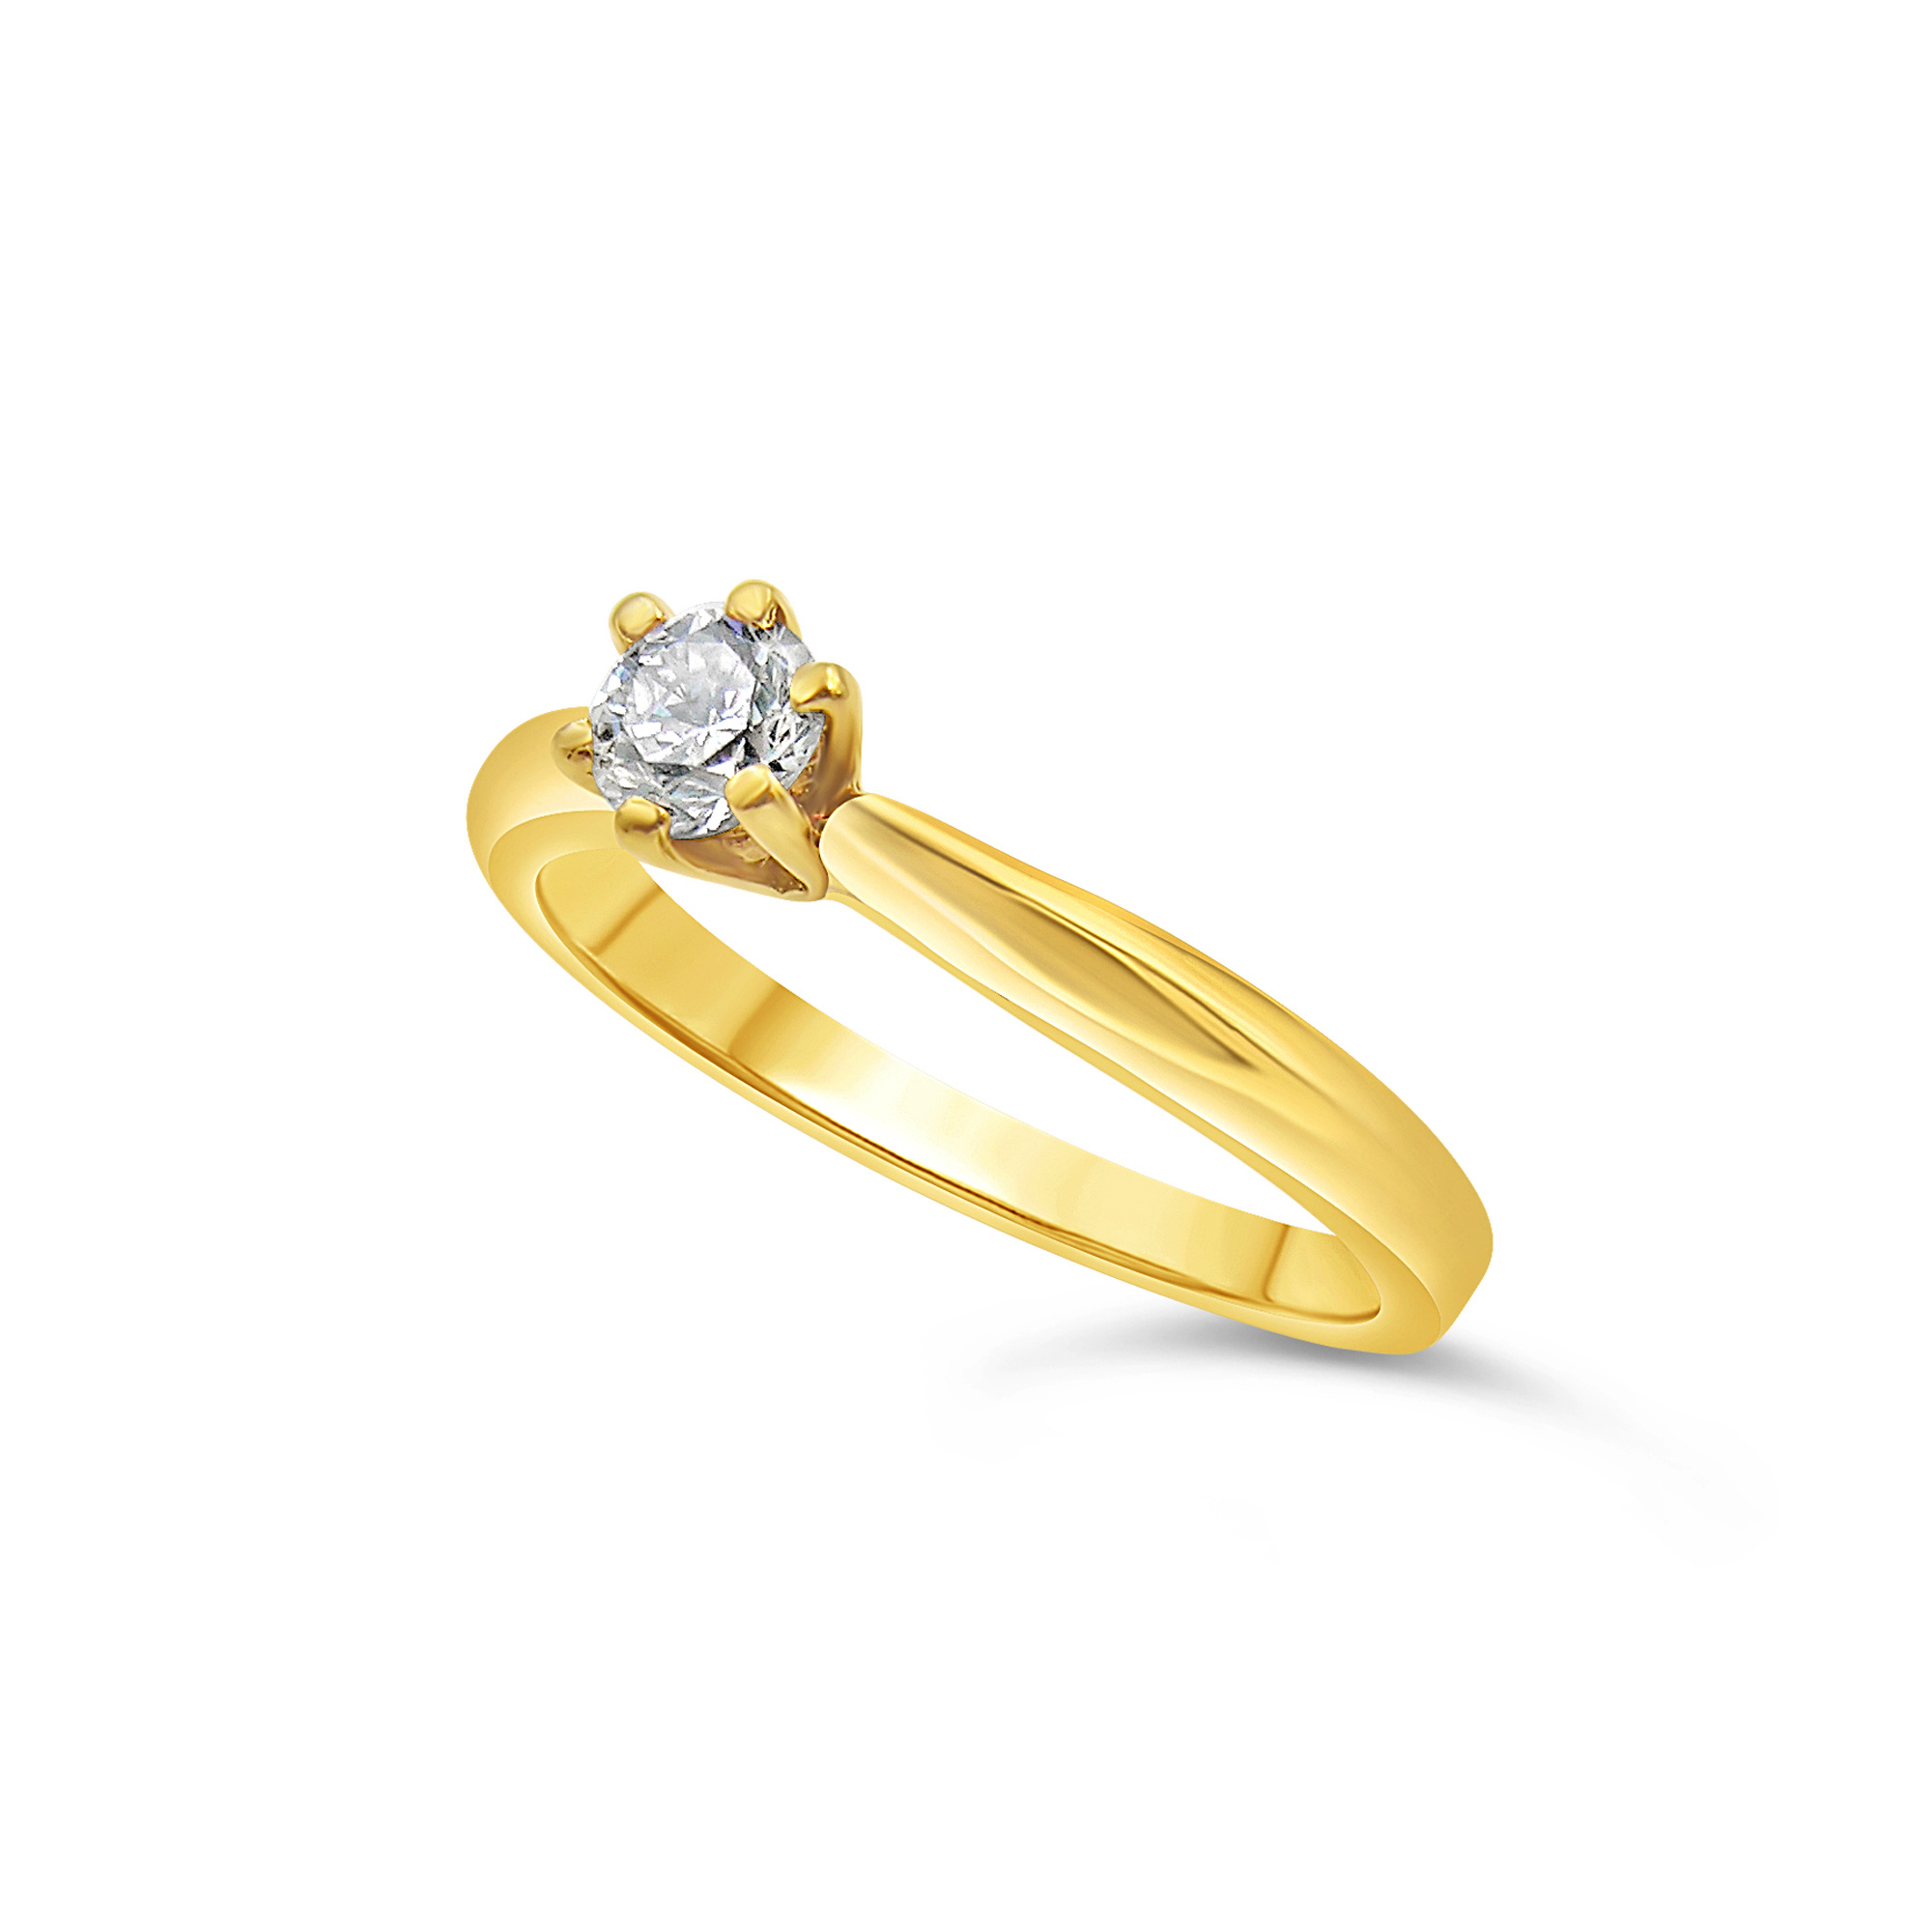 18kt yellow gold engagement ring with 0.33 ct diamond